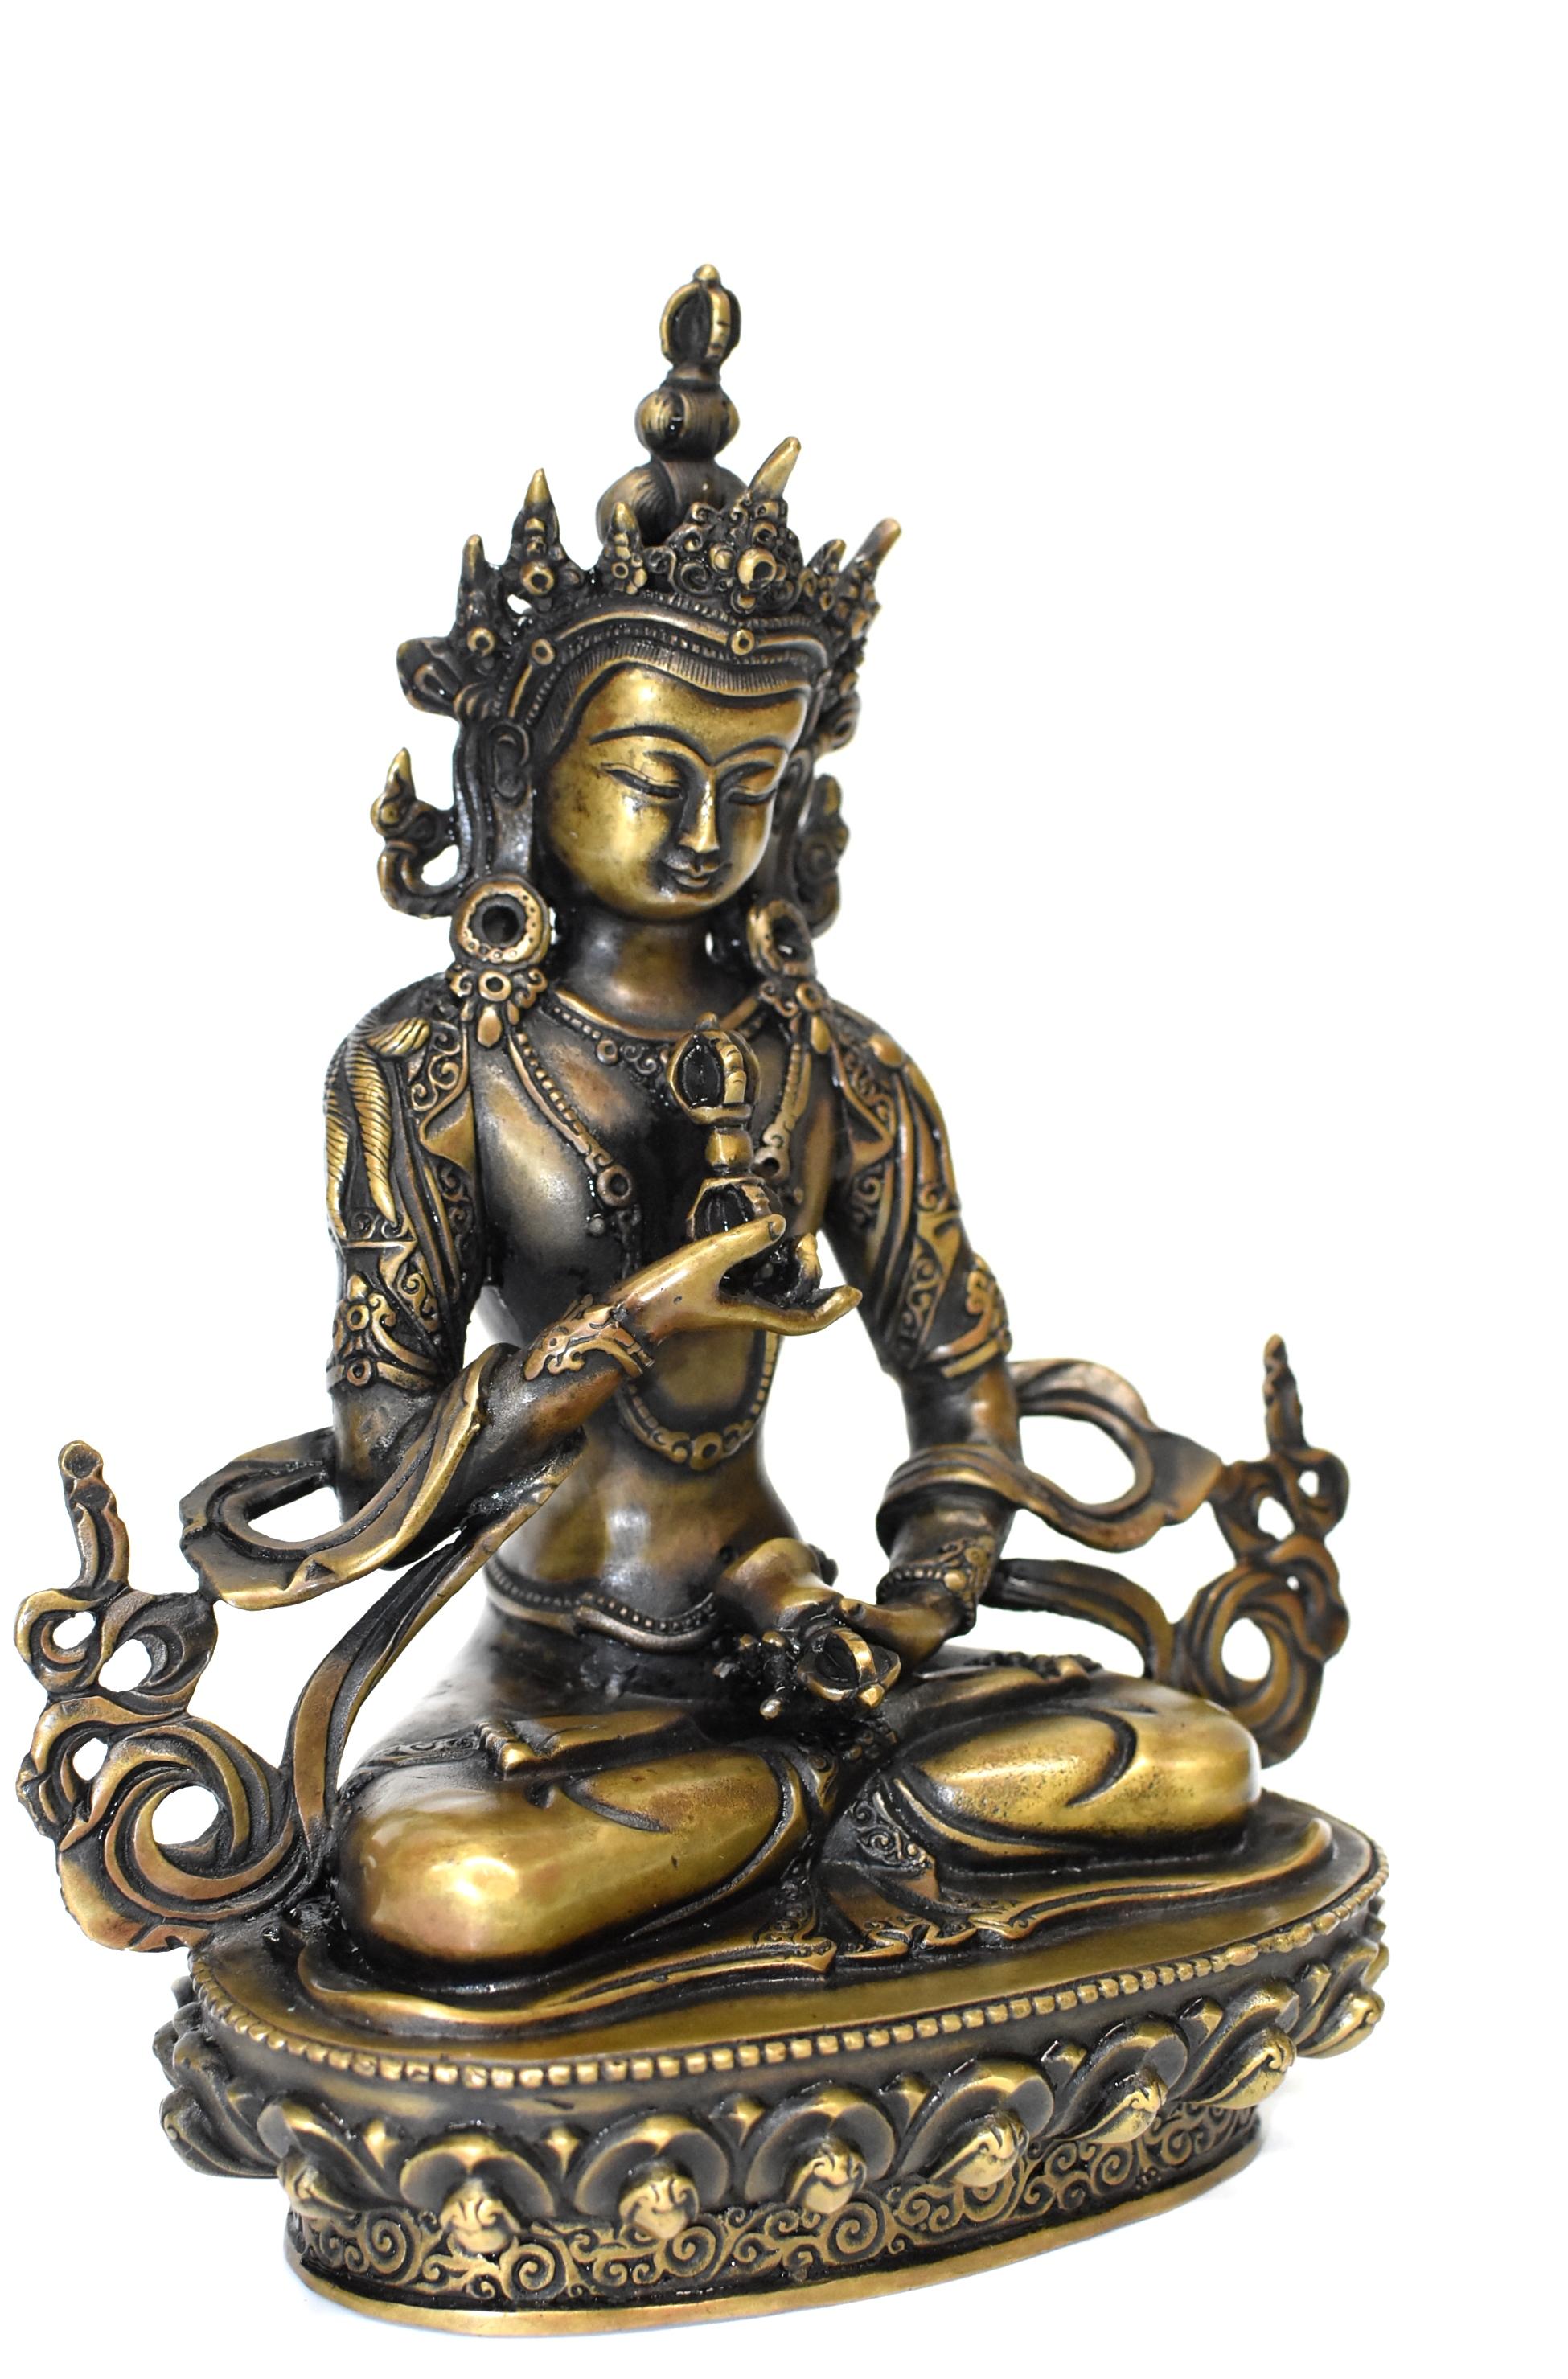 A beautiful statue of Tibetan Bodhisattva Vajrassatva in antique gold finish. The Vajrassatva is an deity that focuses on purification of bad karma.  Meditation upon Vajrassatva is integral to enlightenment as it manifests in one's compassion for